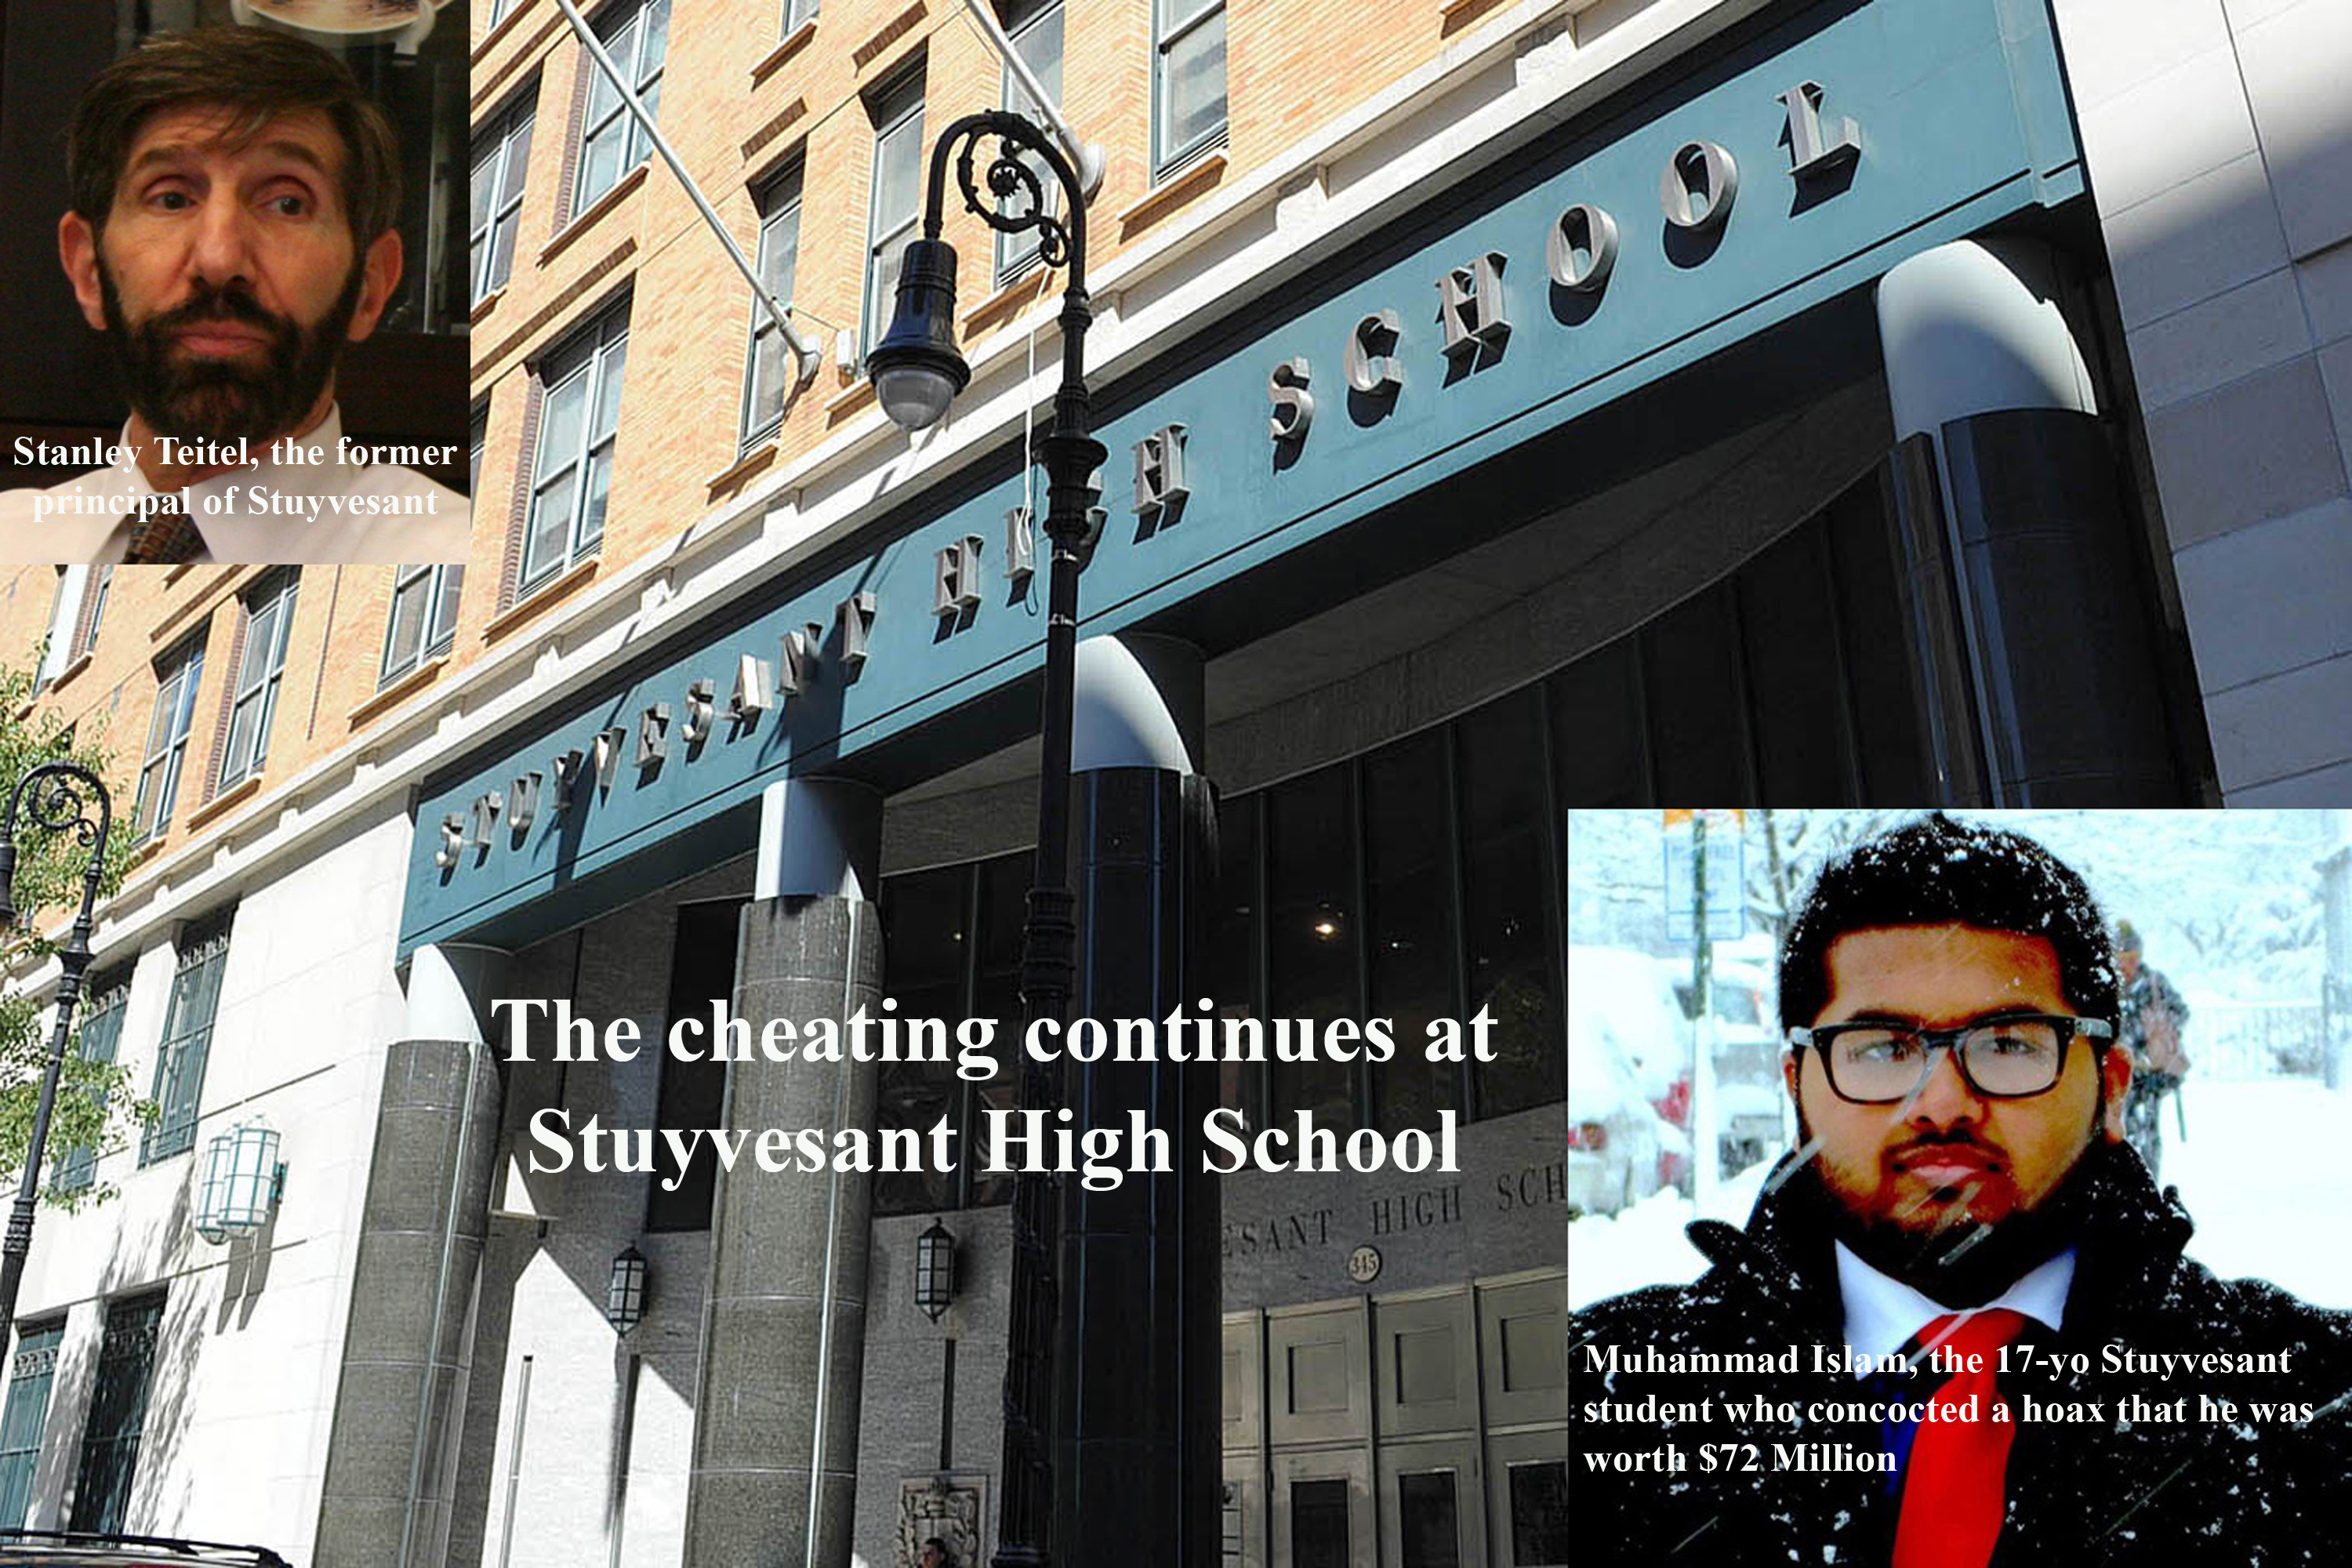 The cheating continues at Stuyvessant